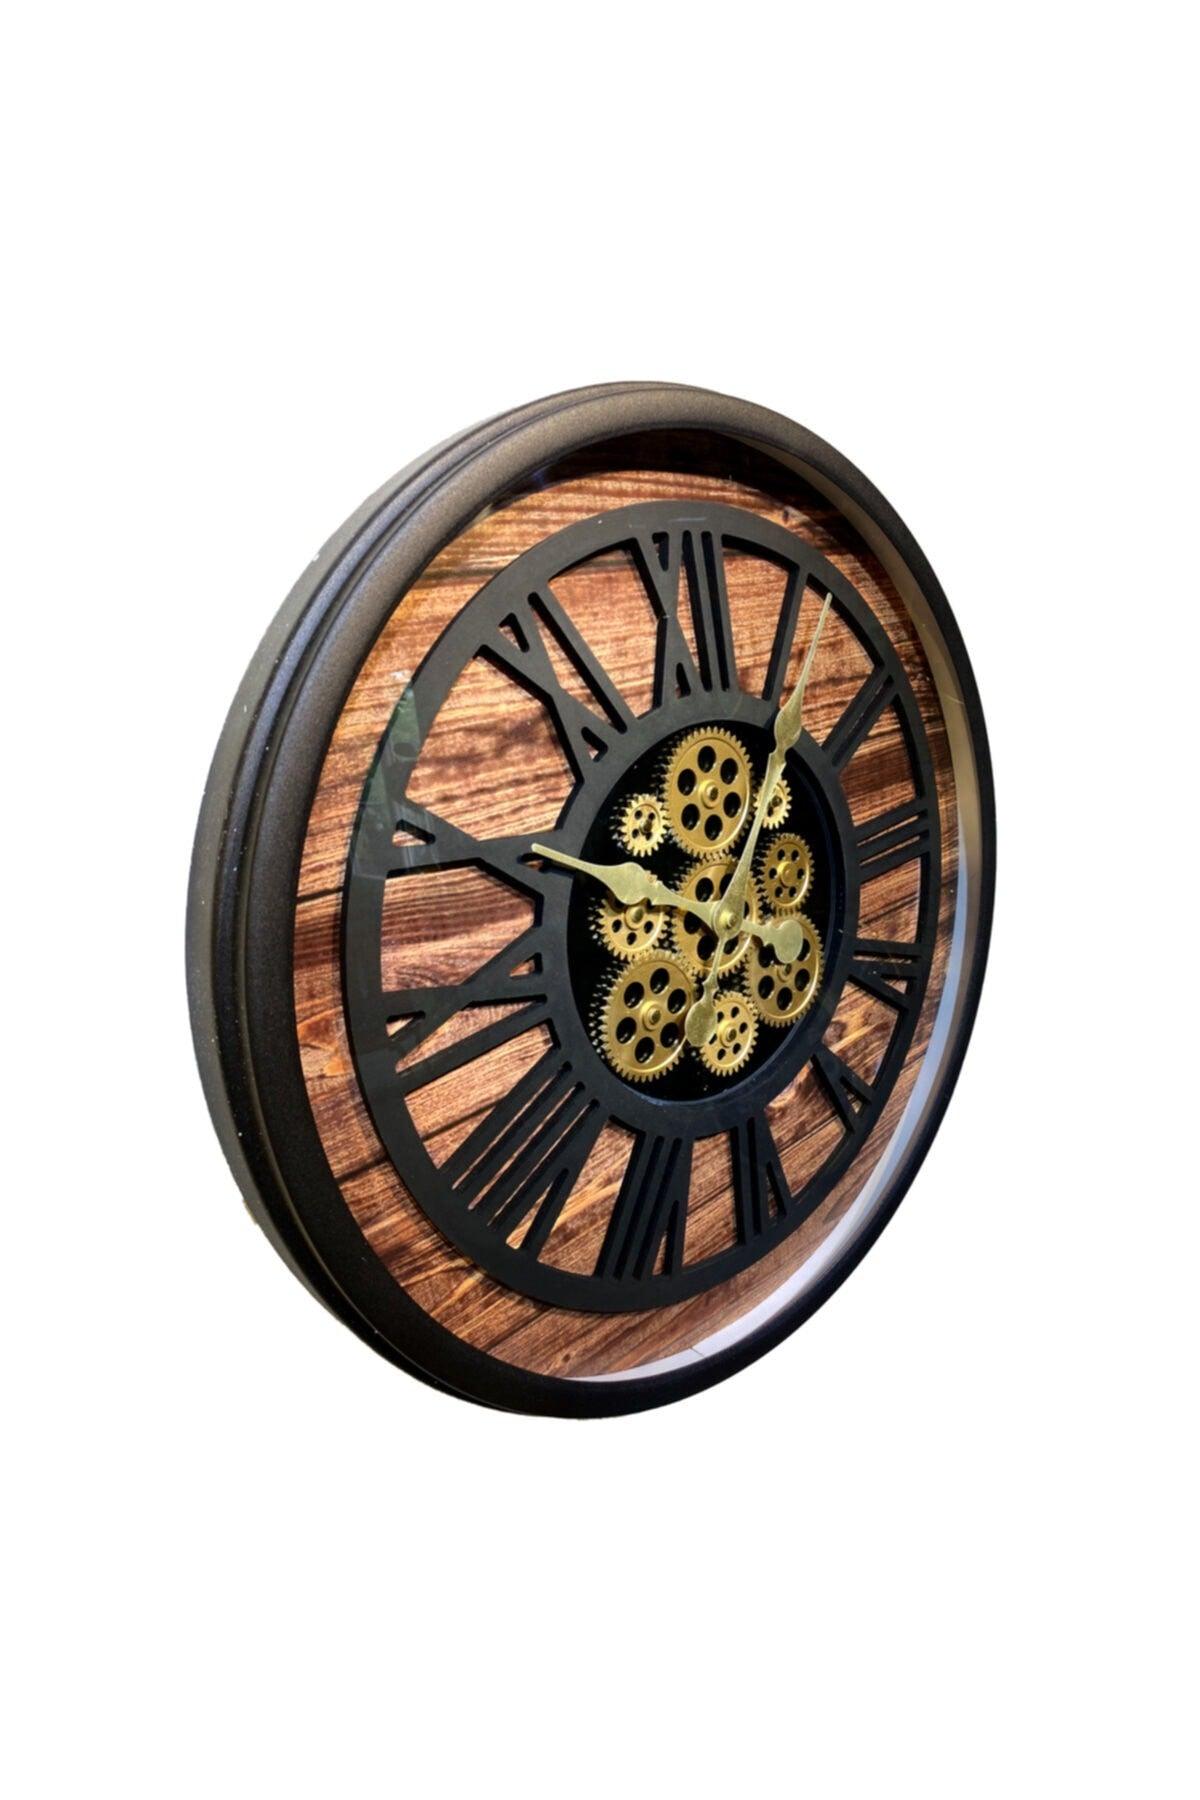 Metal Oven Painted Glass Wall Clock with Active Wheel - Swordslife